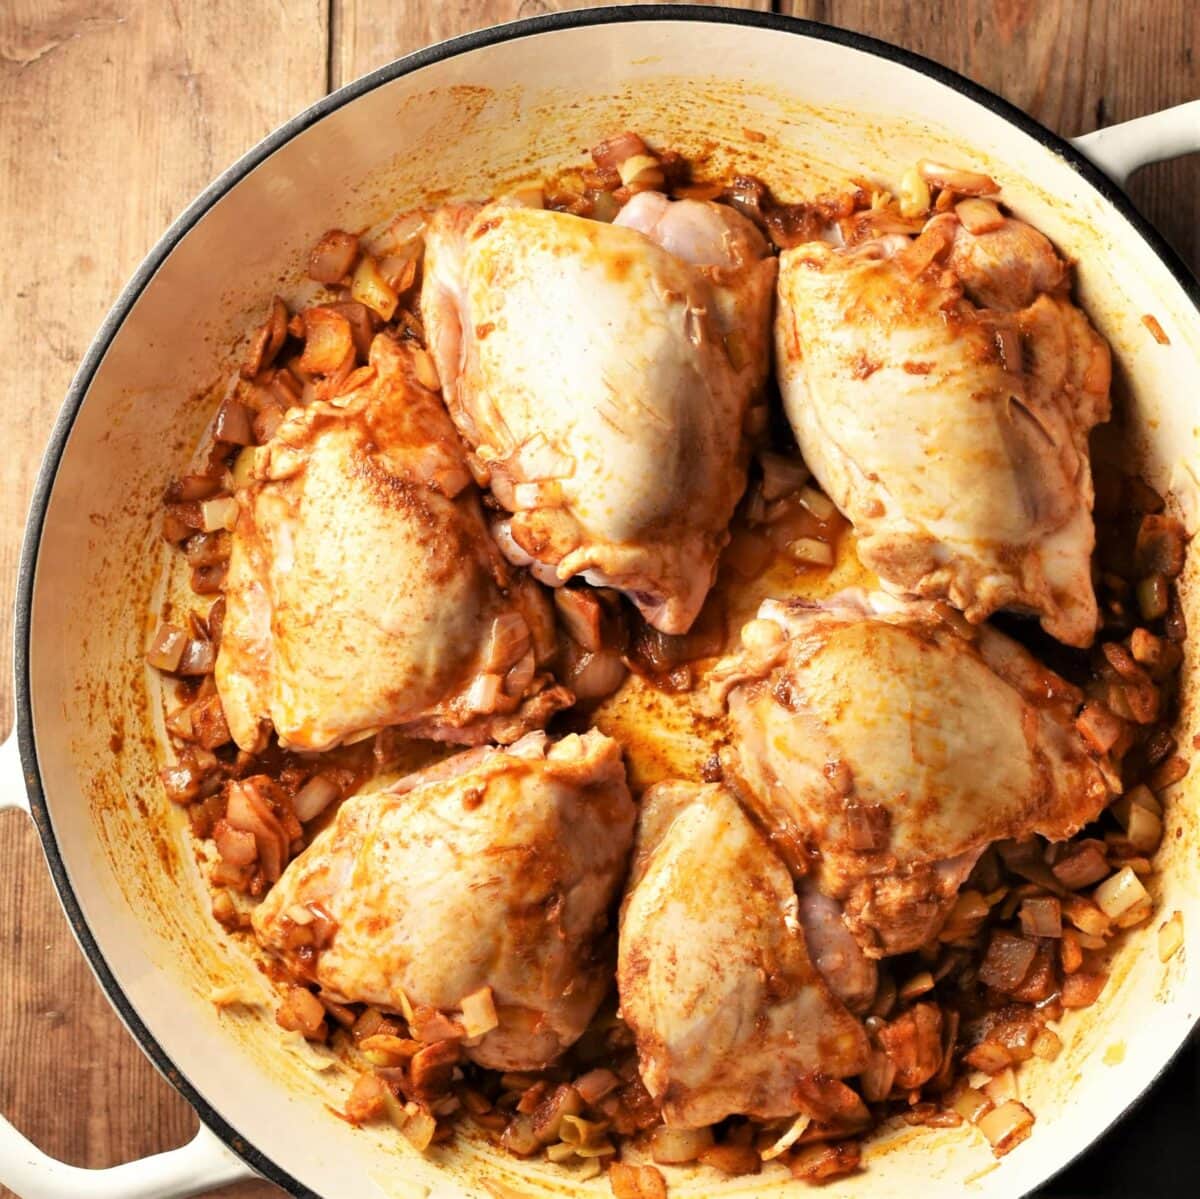 6 skinless chicken thighs with spices in large shallow dish.